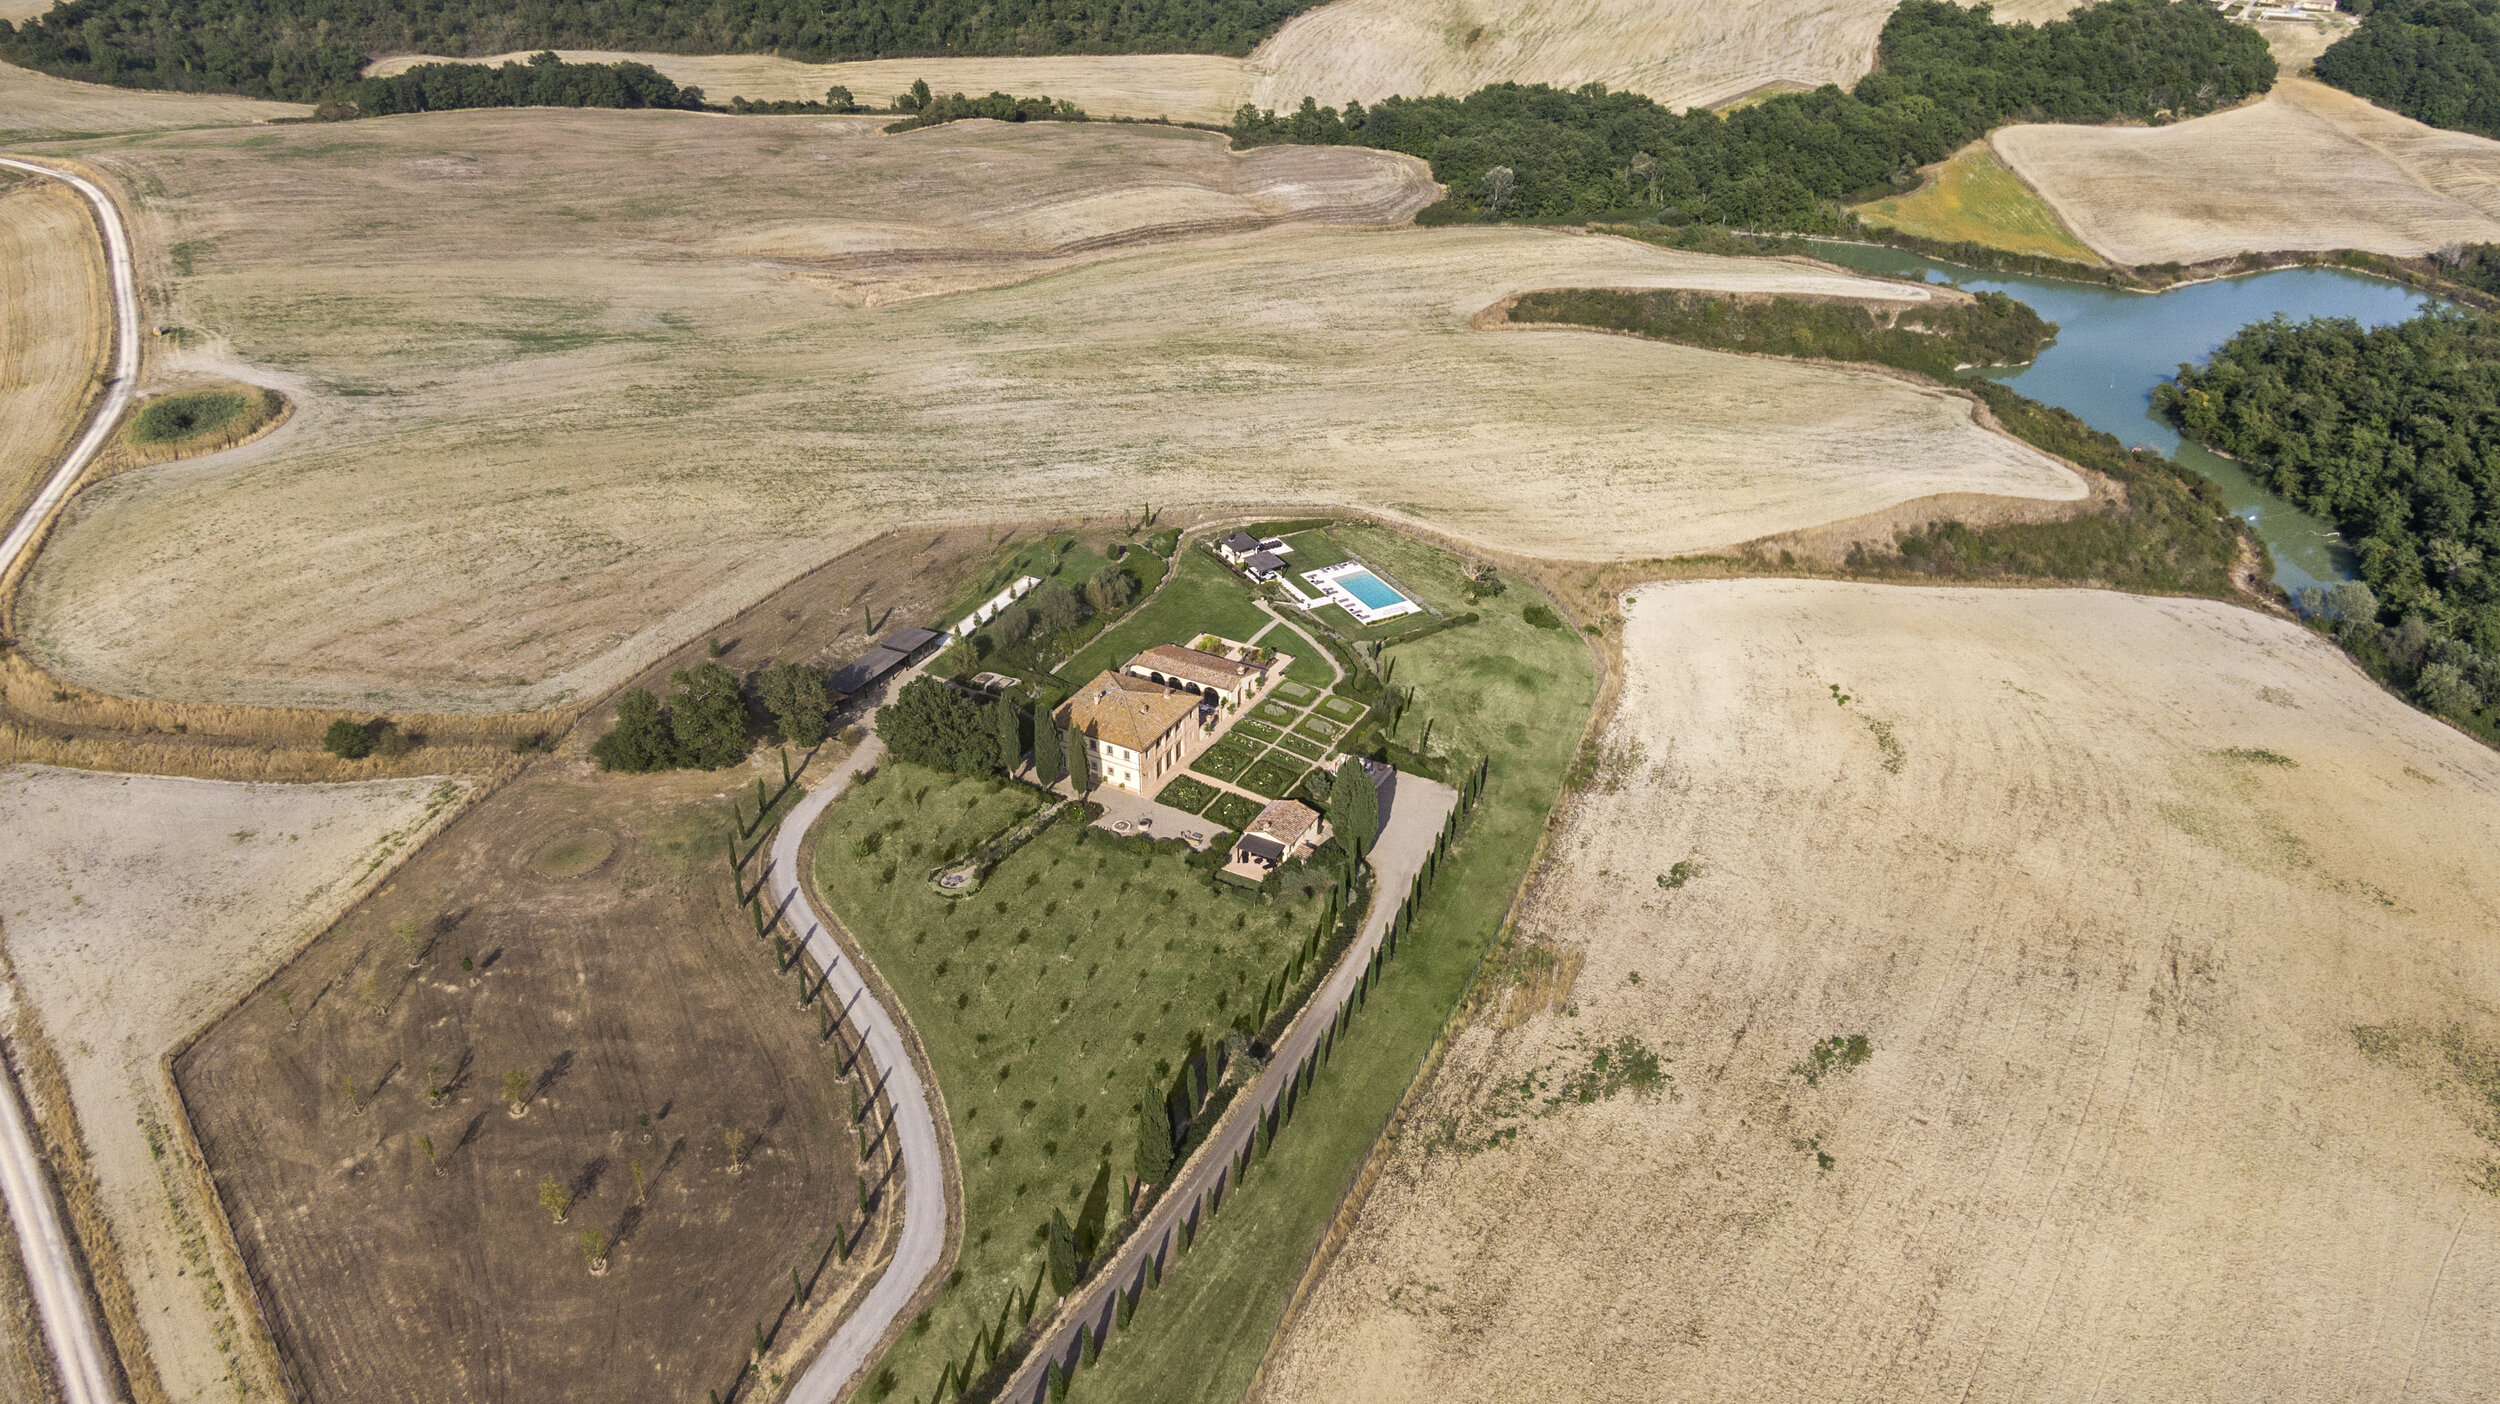 Francis York Contemporary Villa and Compound in Tuscany 6.jpg